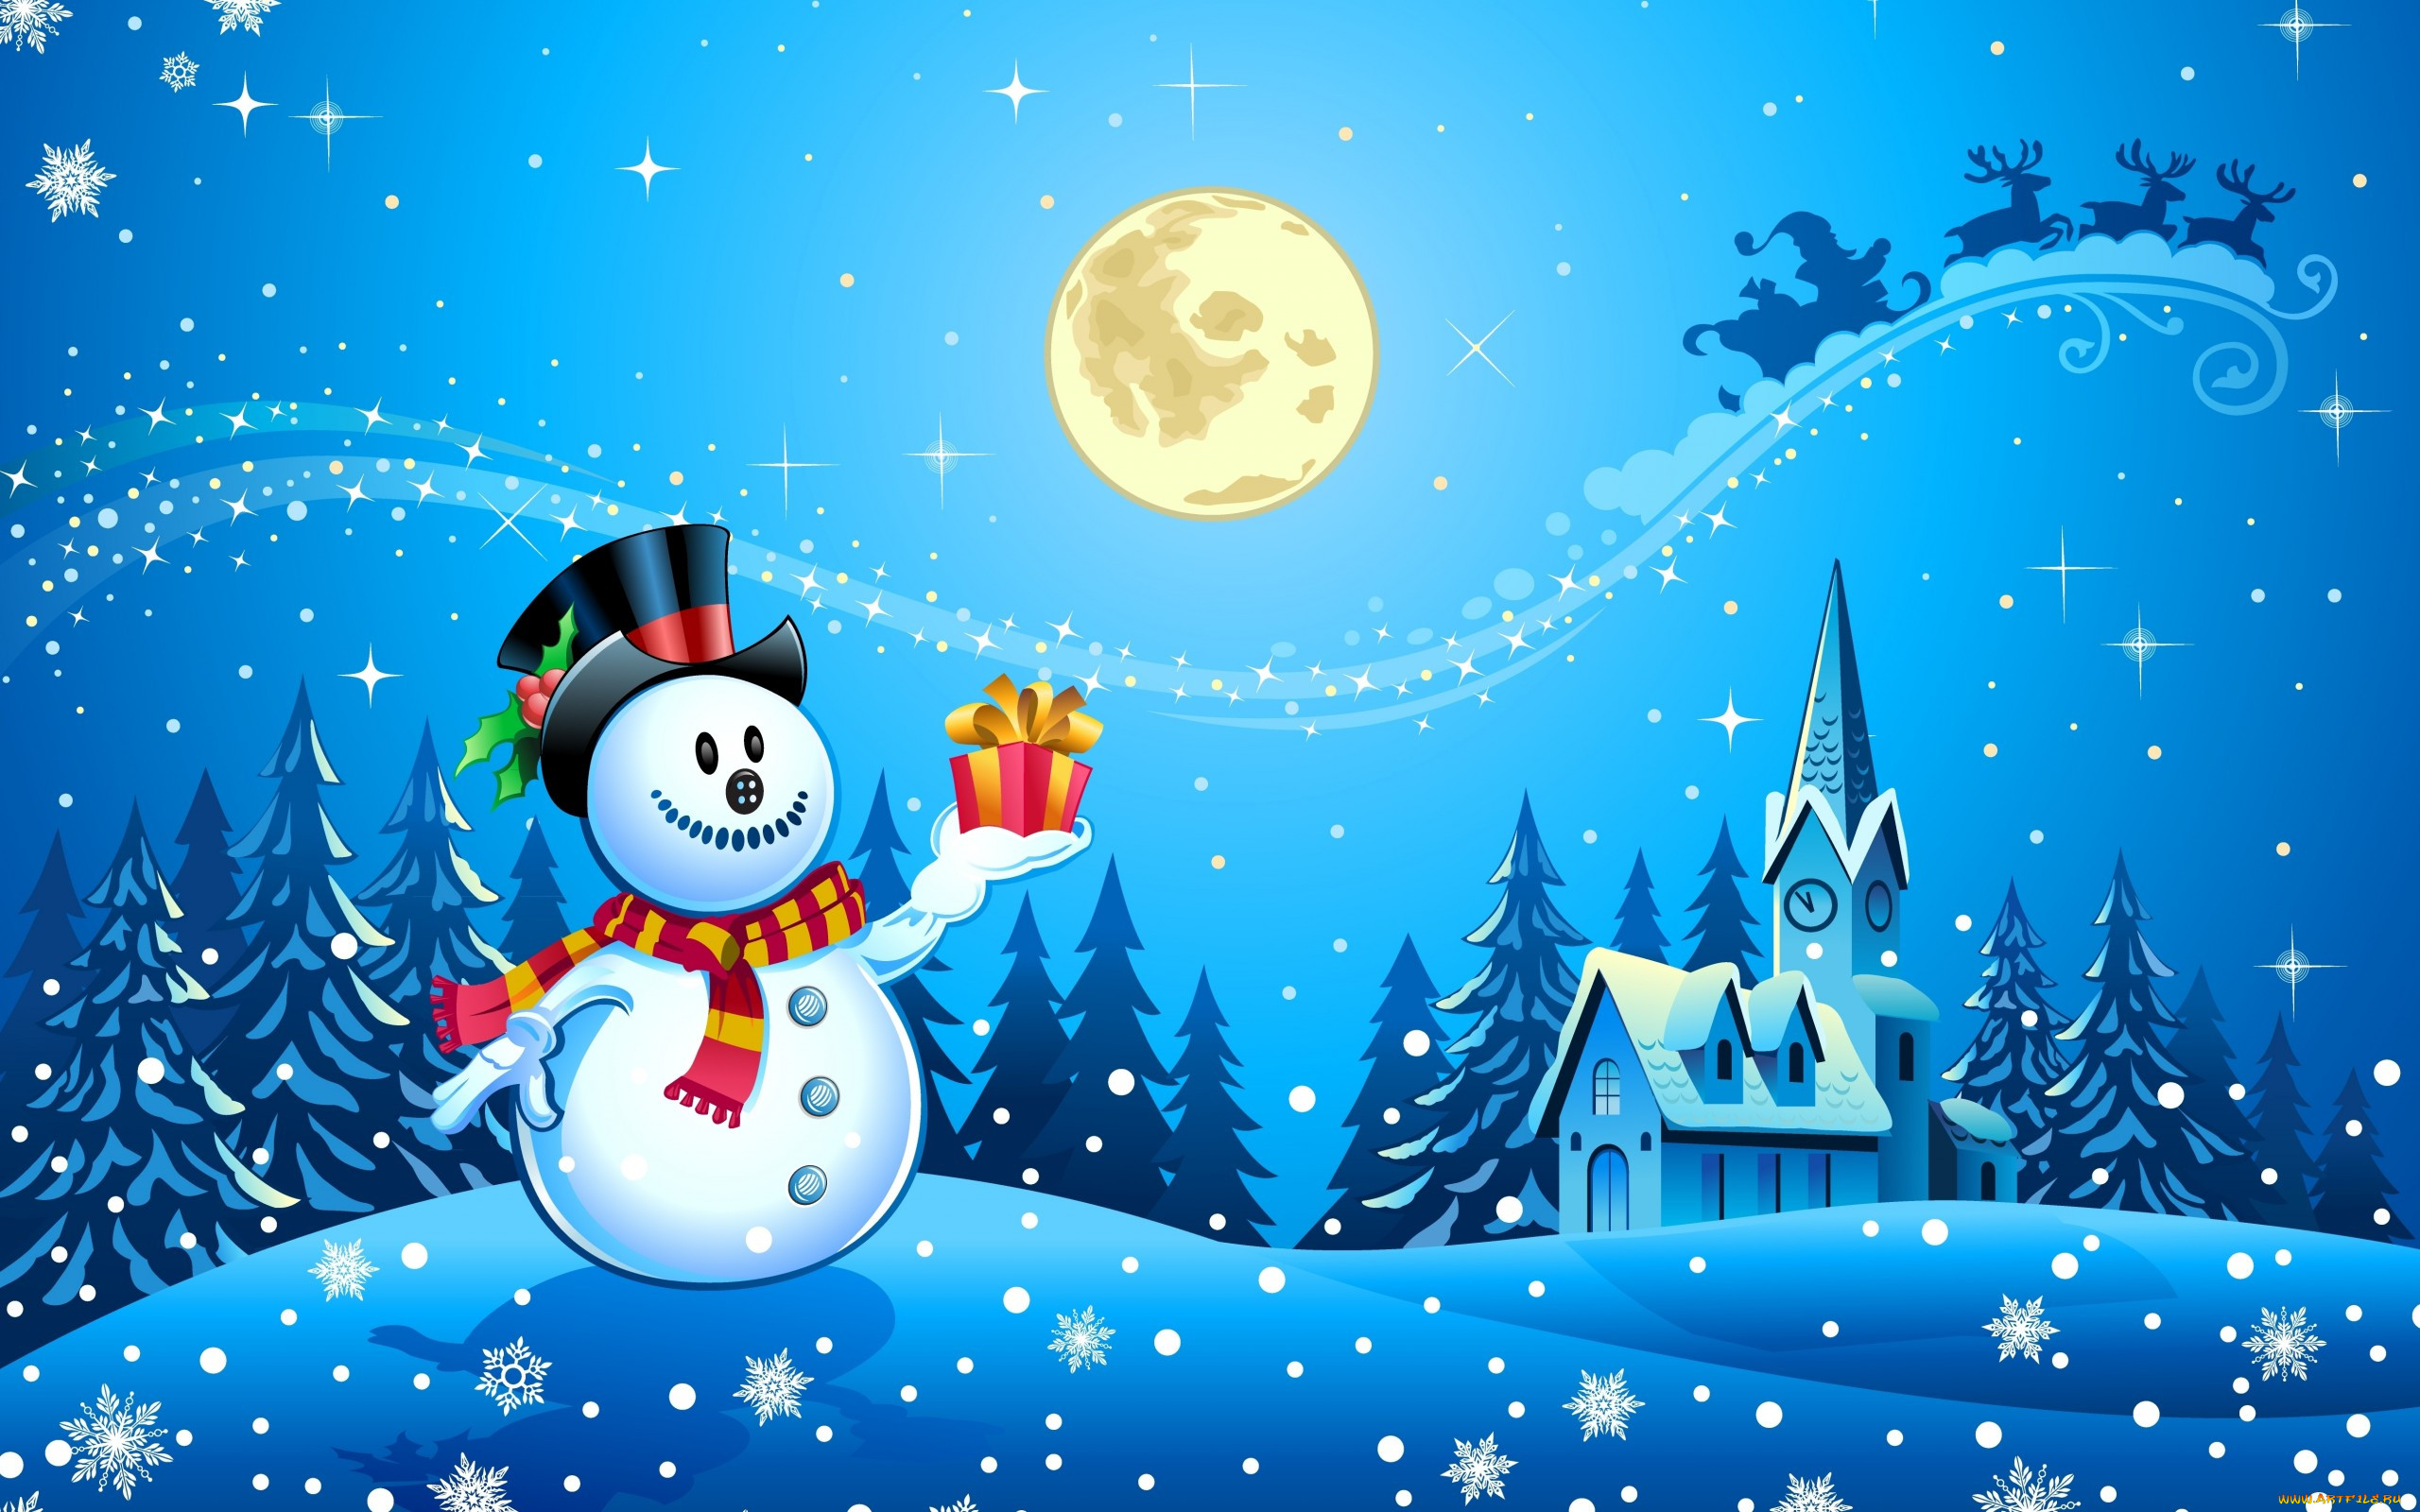 , , , , , holidays, year, new, christmas, happy, merry, new year, snowman, merry christmas, snow, trees, scarf, ice town, full moon, santa claus, reindeer, houses, clock, midnight, snowflakes,  , ,   , , , ,  ,  , -, , , , , 